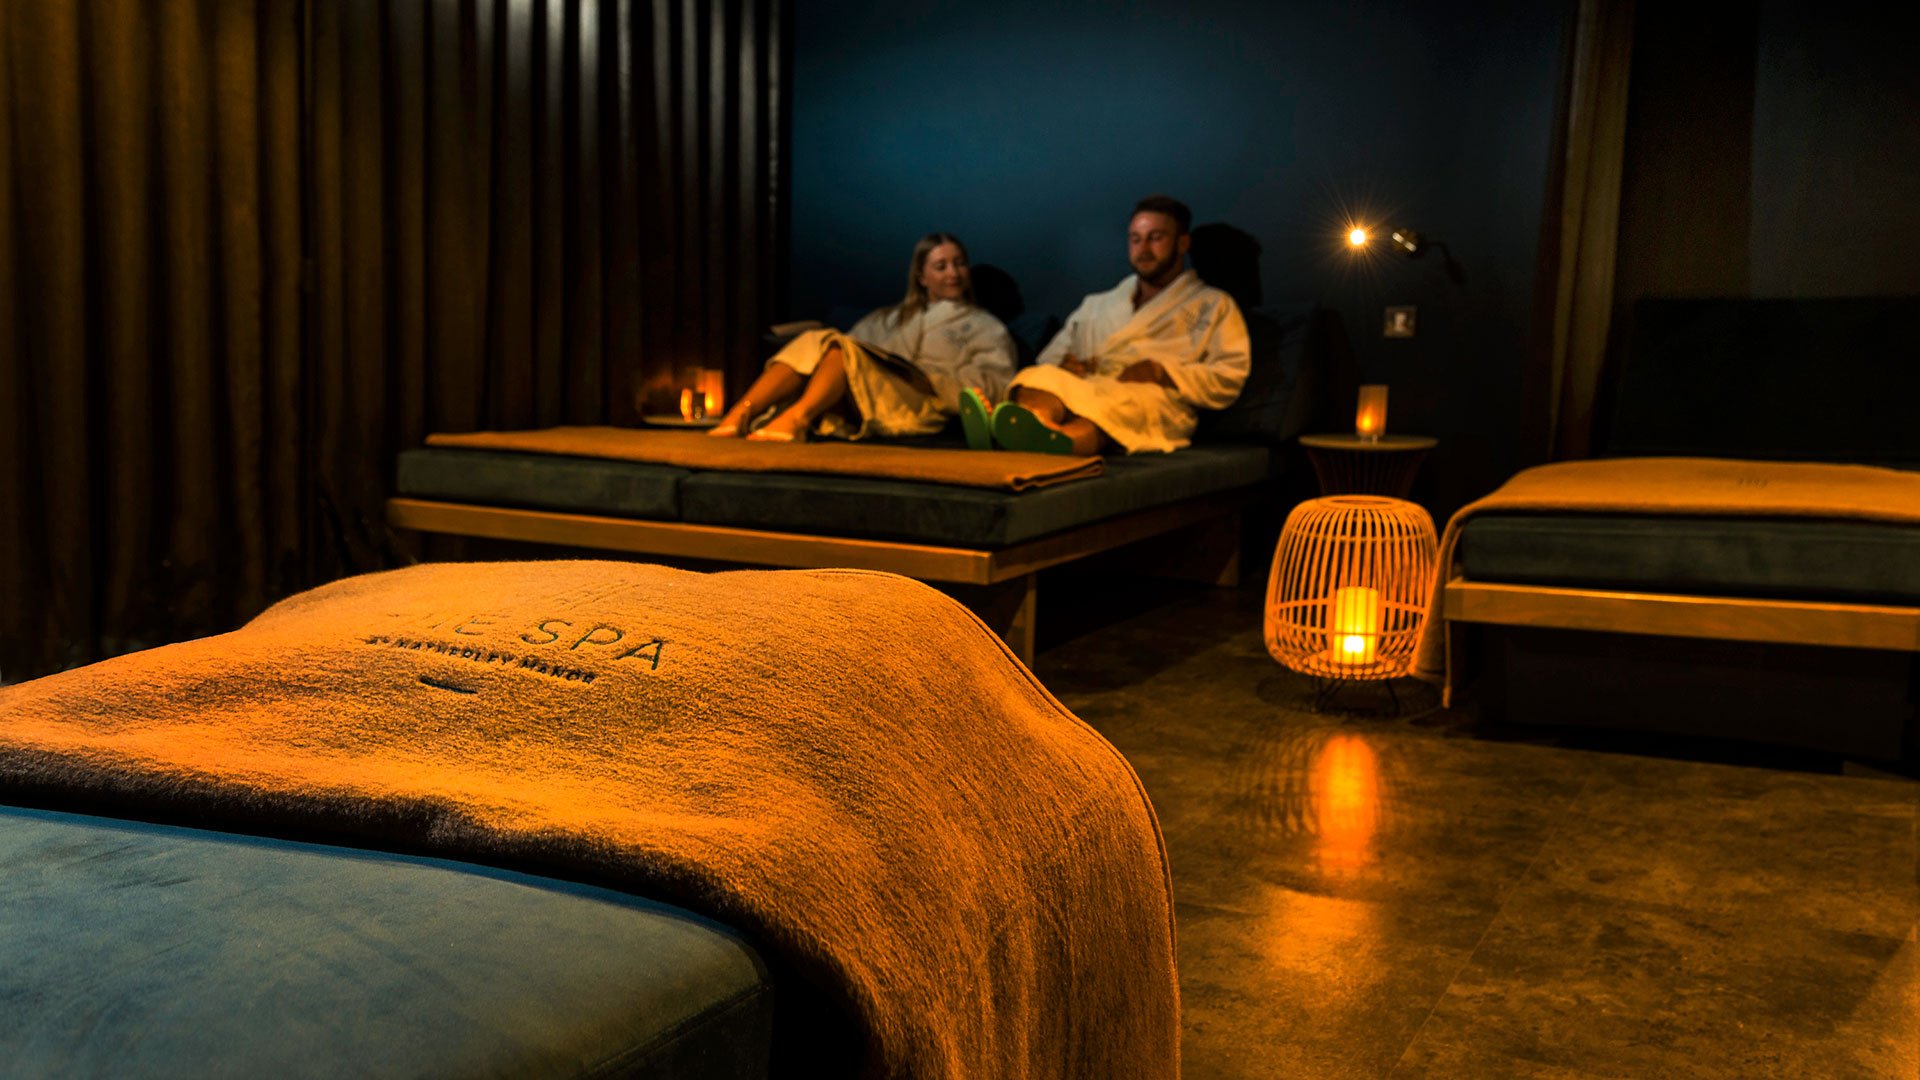 A couple relaxing in the Relaxtaion room - Hatherley Manor Hotel & Spa, Cotswolds